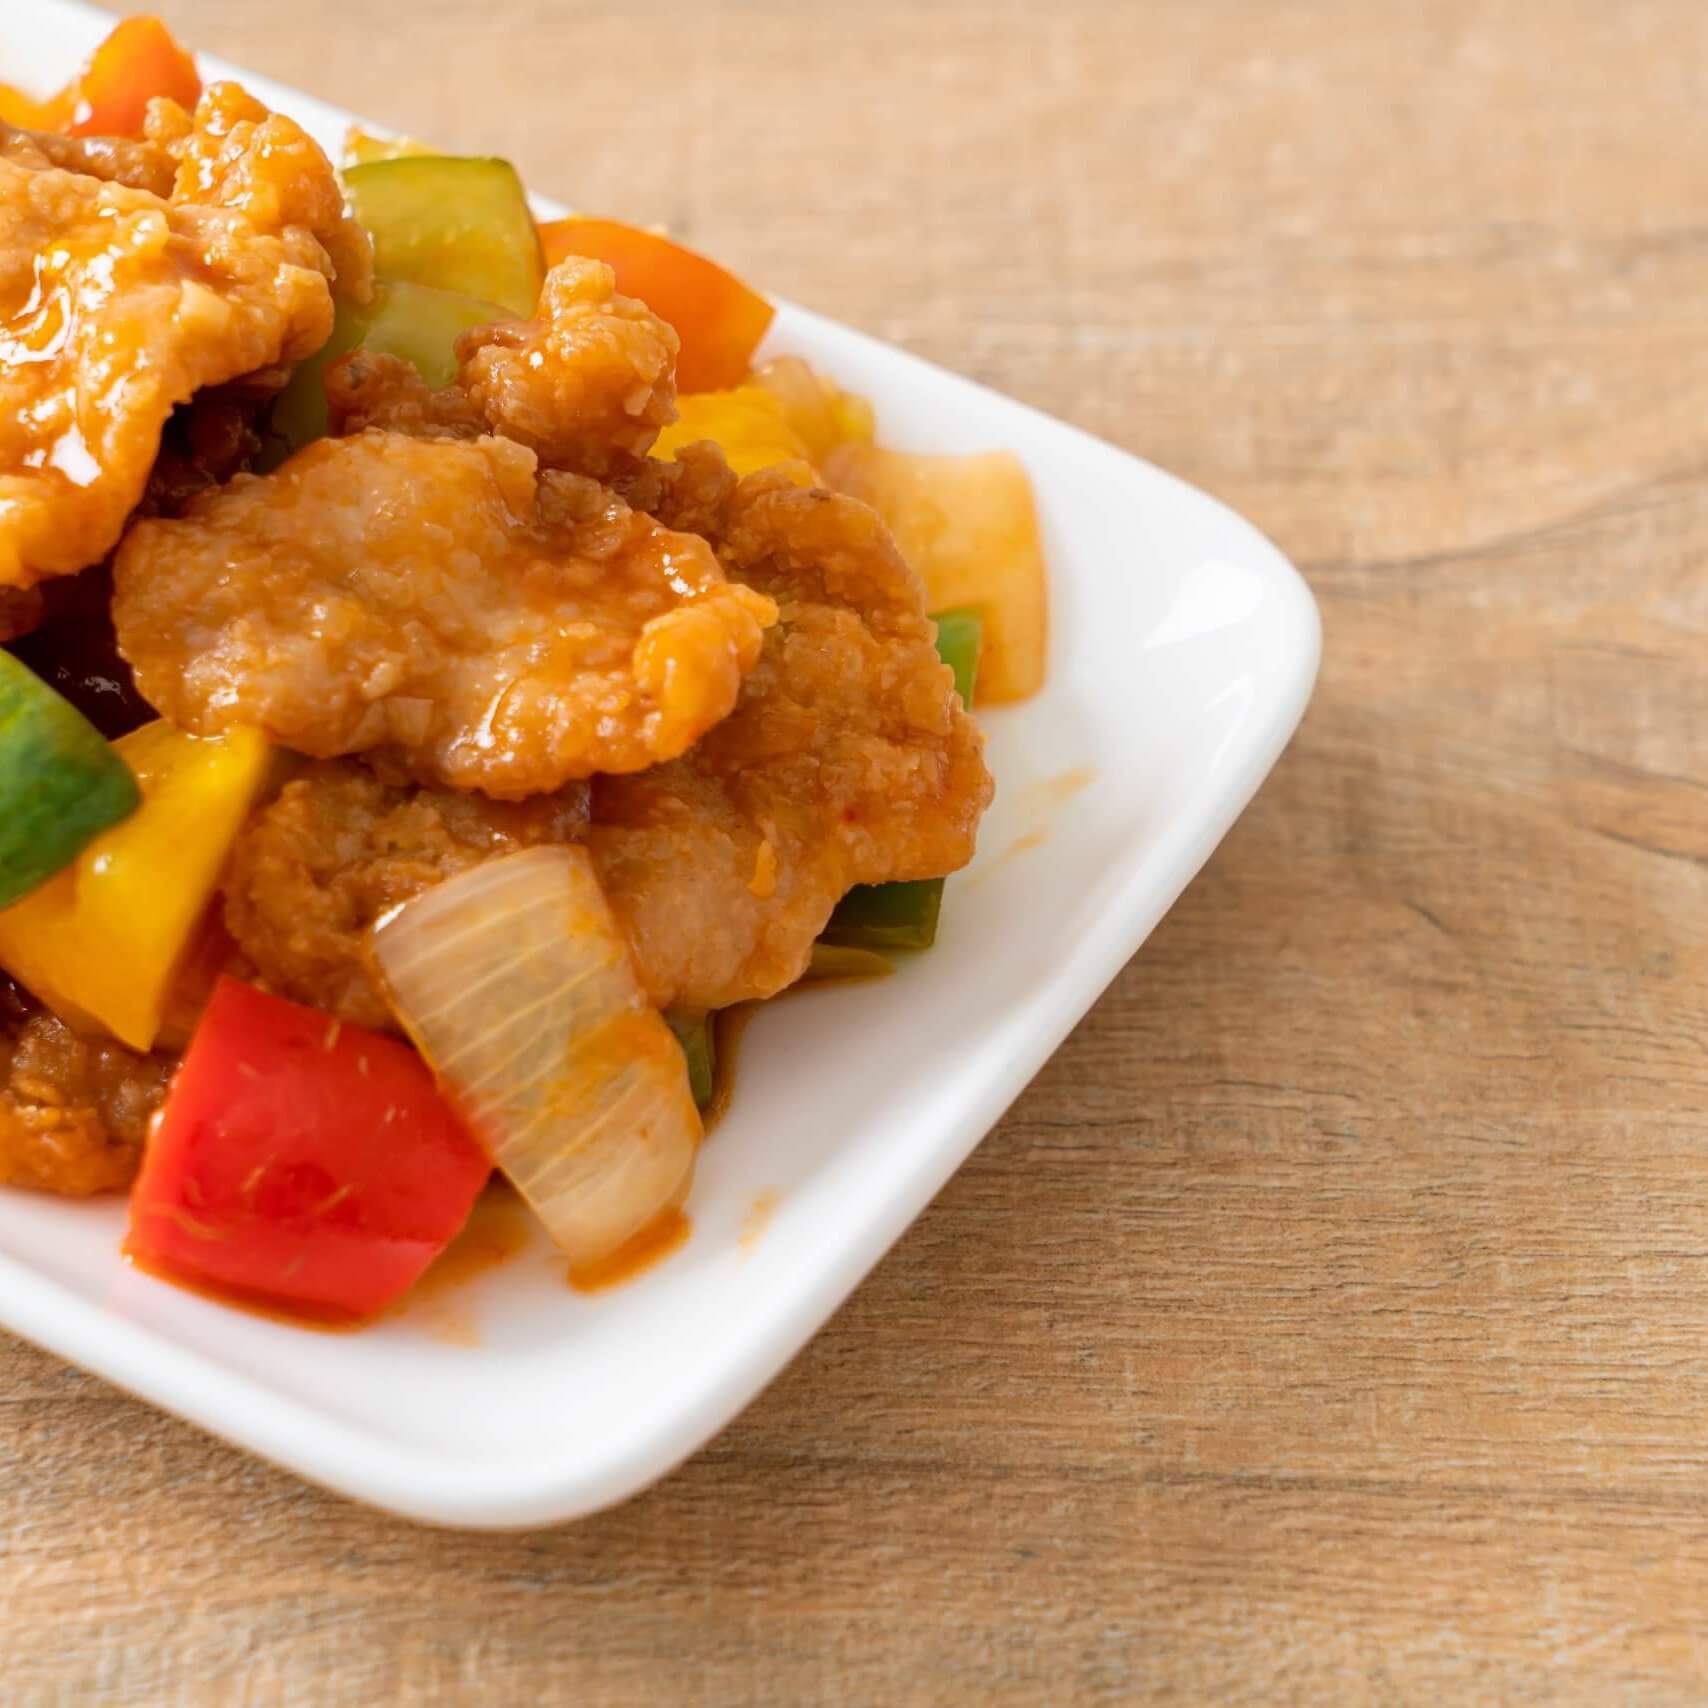 Stir,Fried,Sweet,And,Sour,Sauce,With,Pork,And,Vegetable